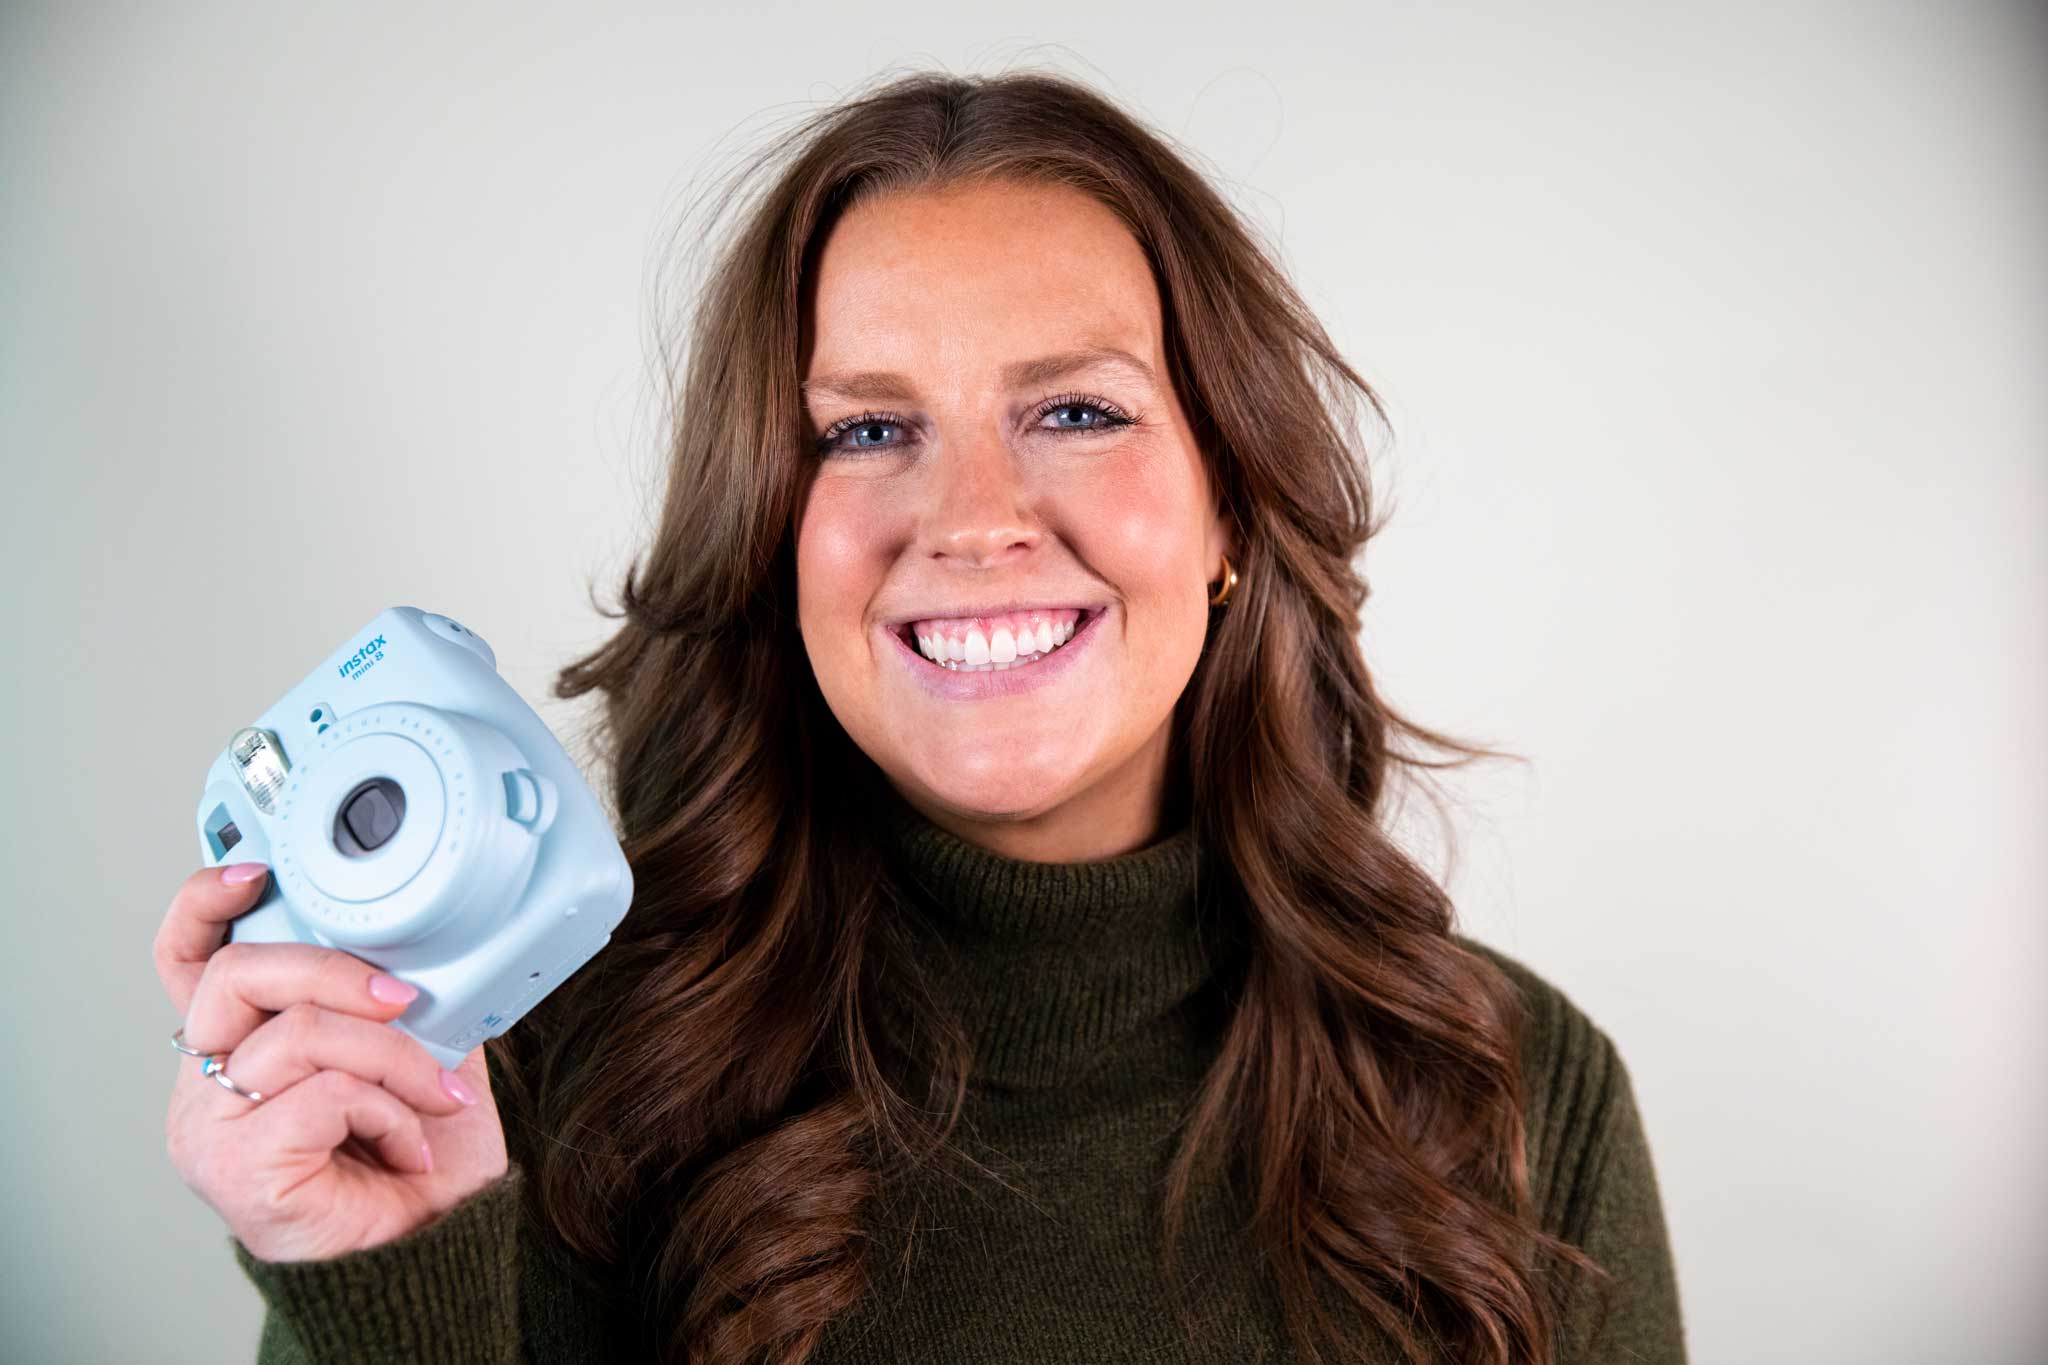 A Quantum Workplace employee smiling and holding a blue polaroid camera.